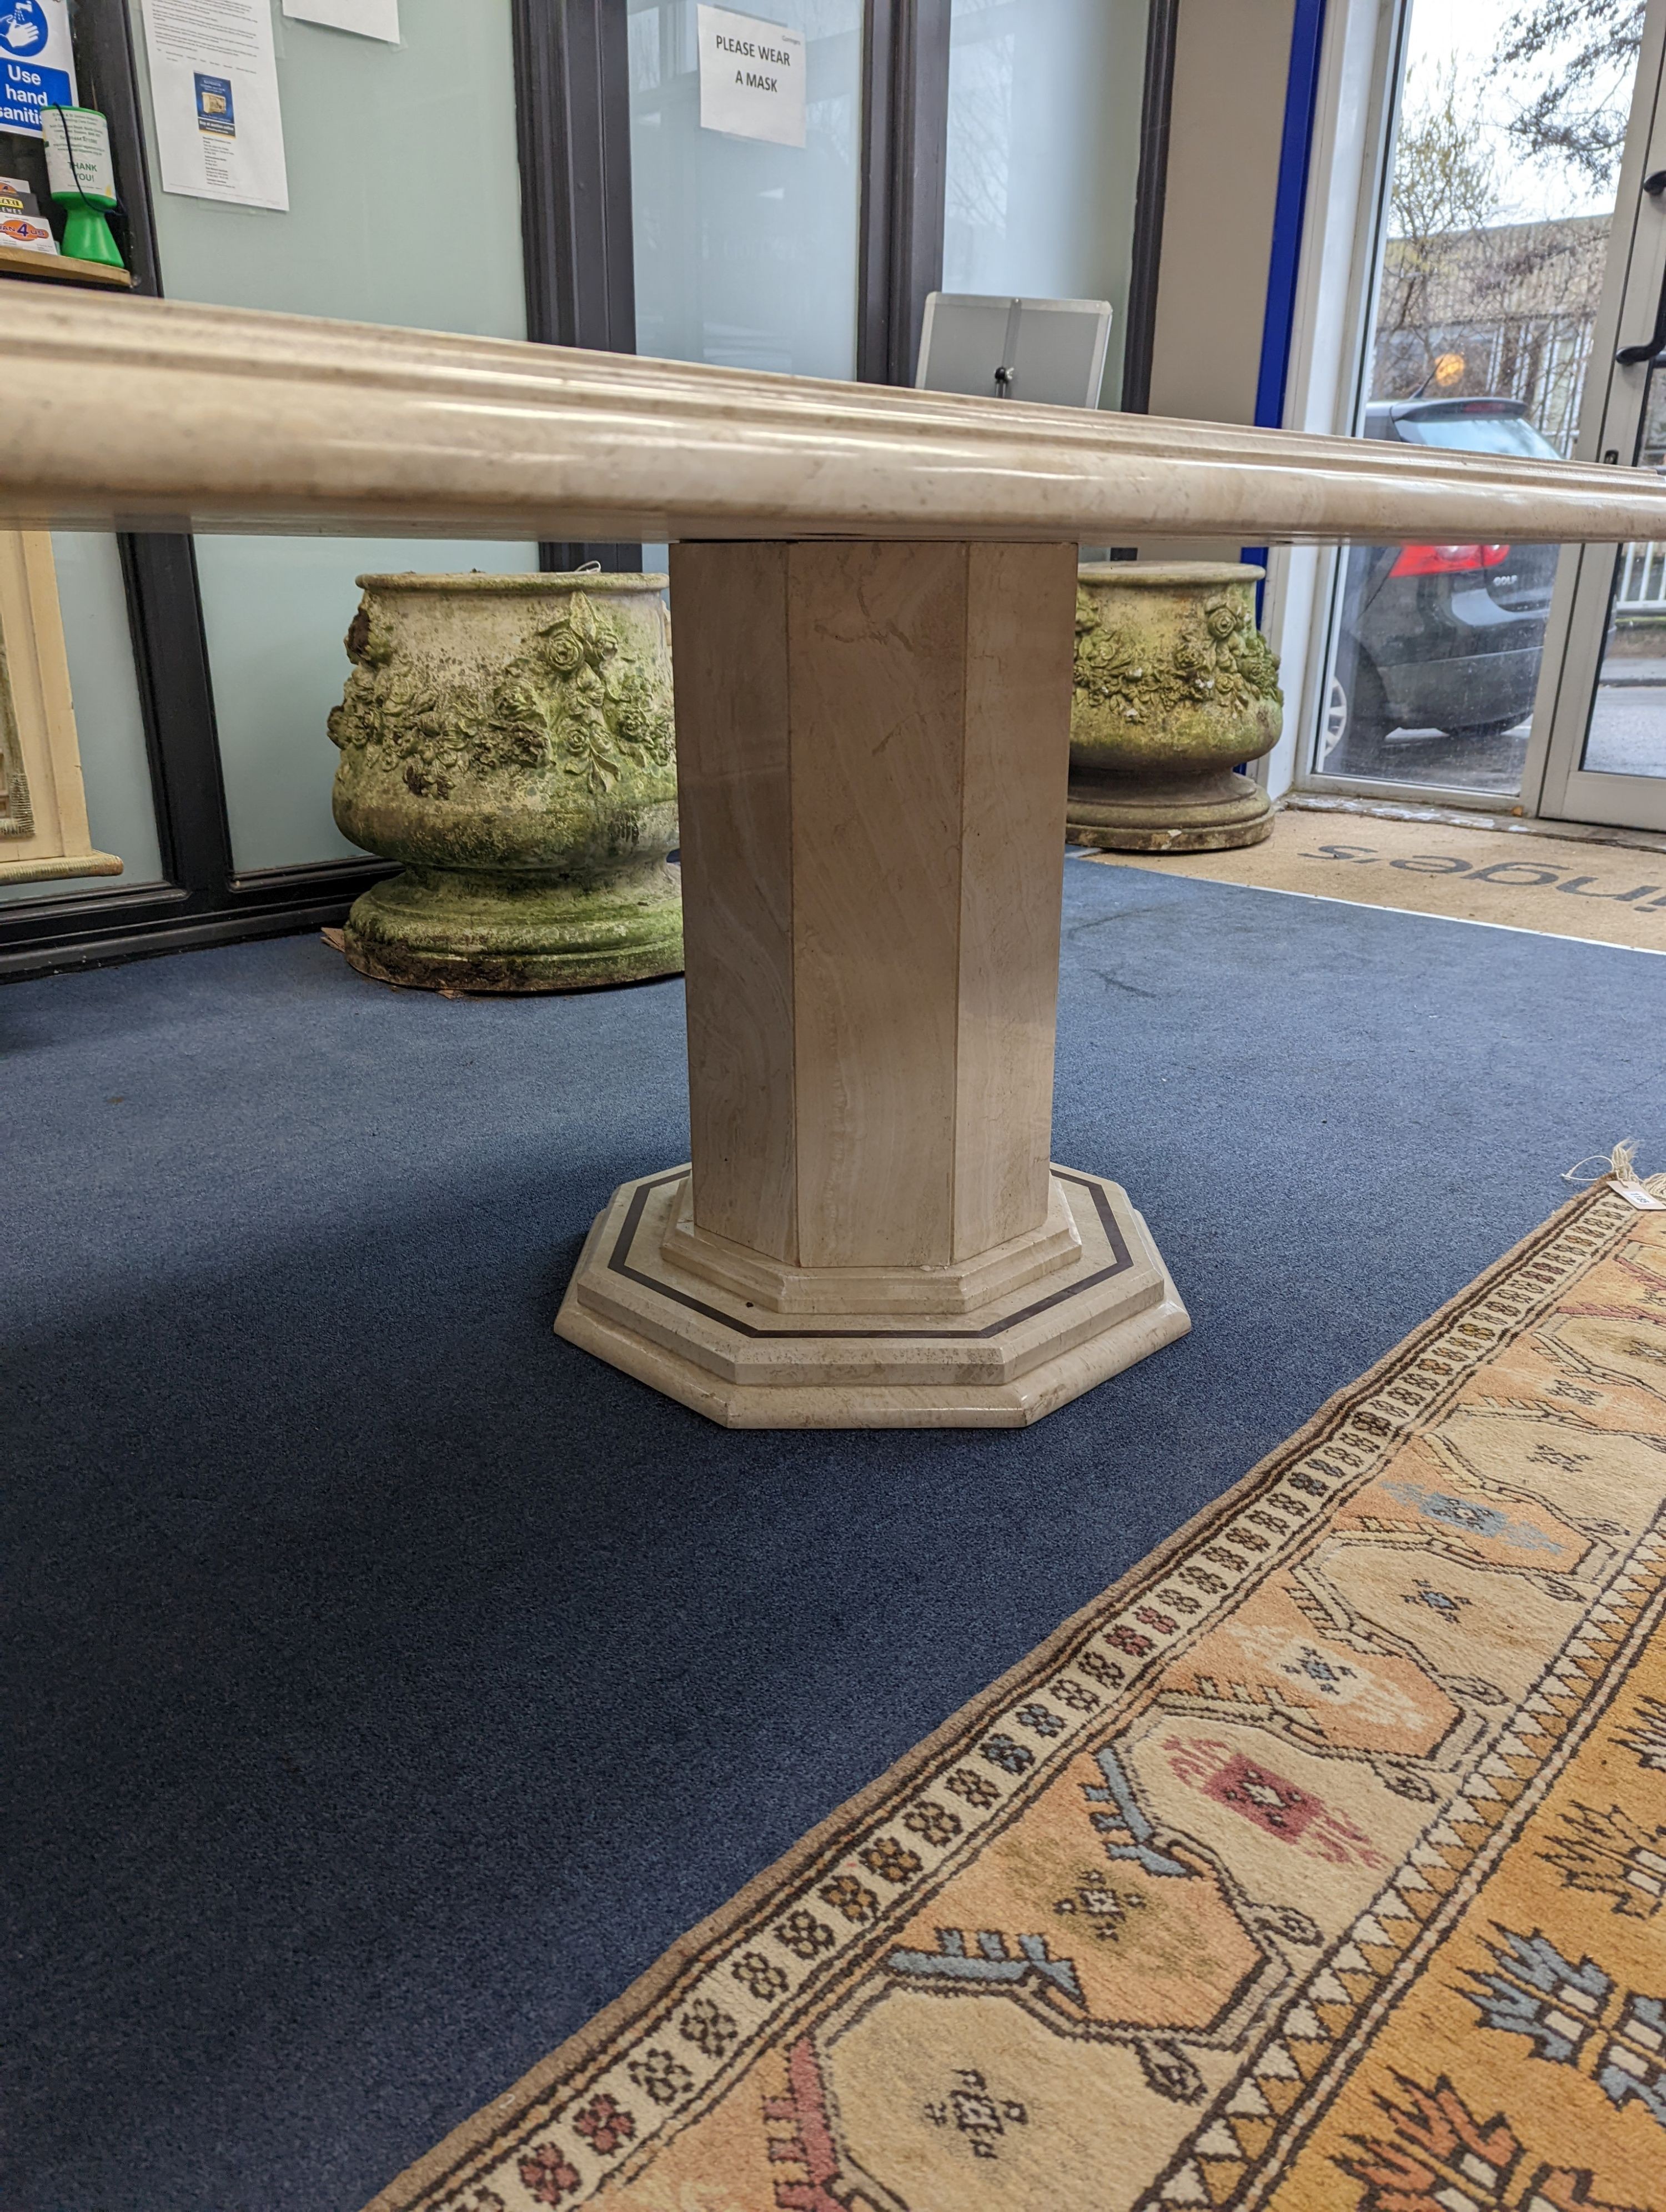 A Travertine marble dining table of elongated ocgtagonal form on twin octagonal column supports, length 260cm, depth 120cm, height 74cm